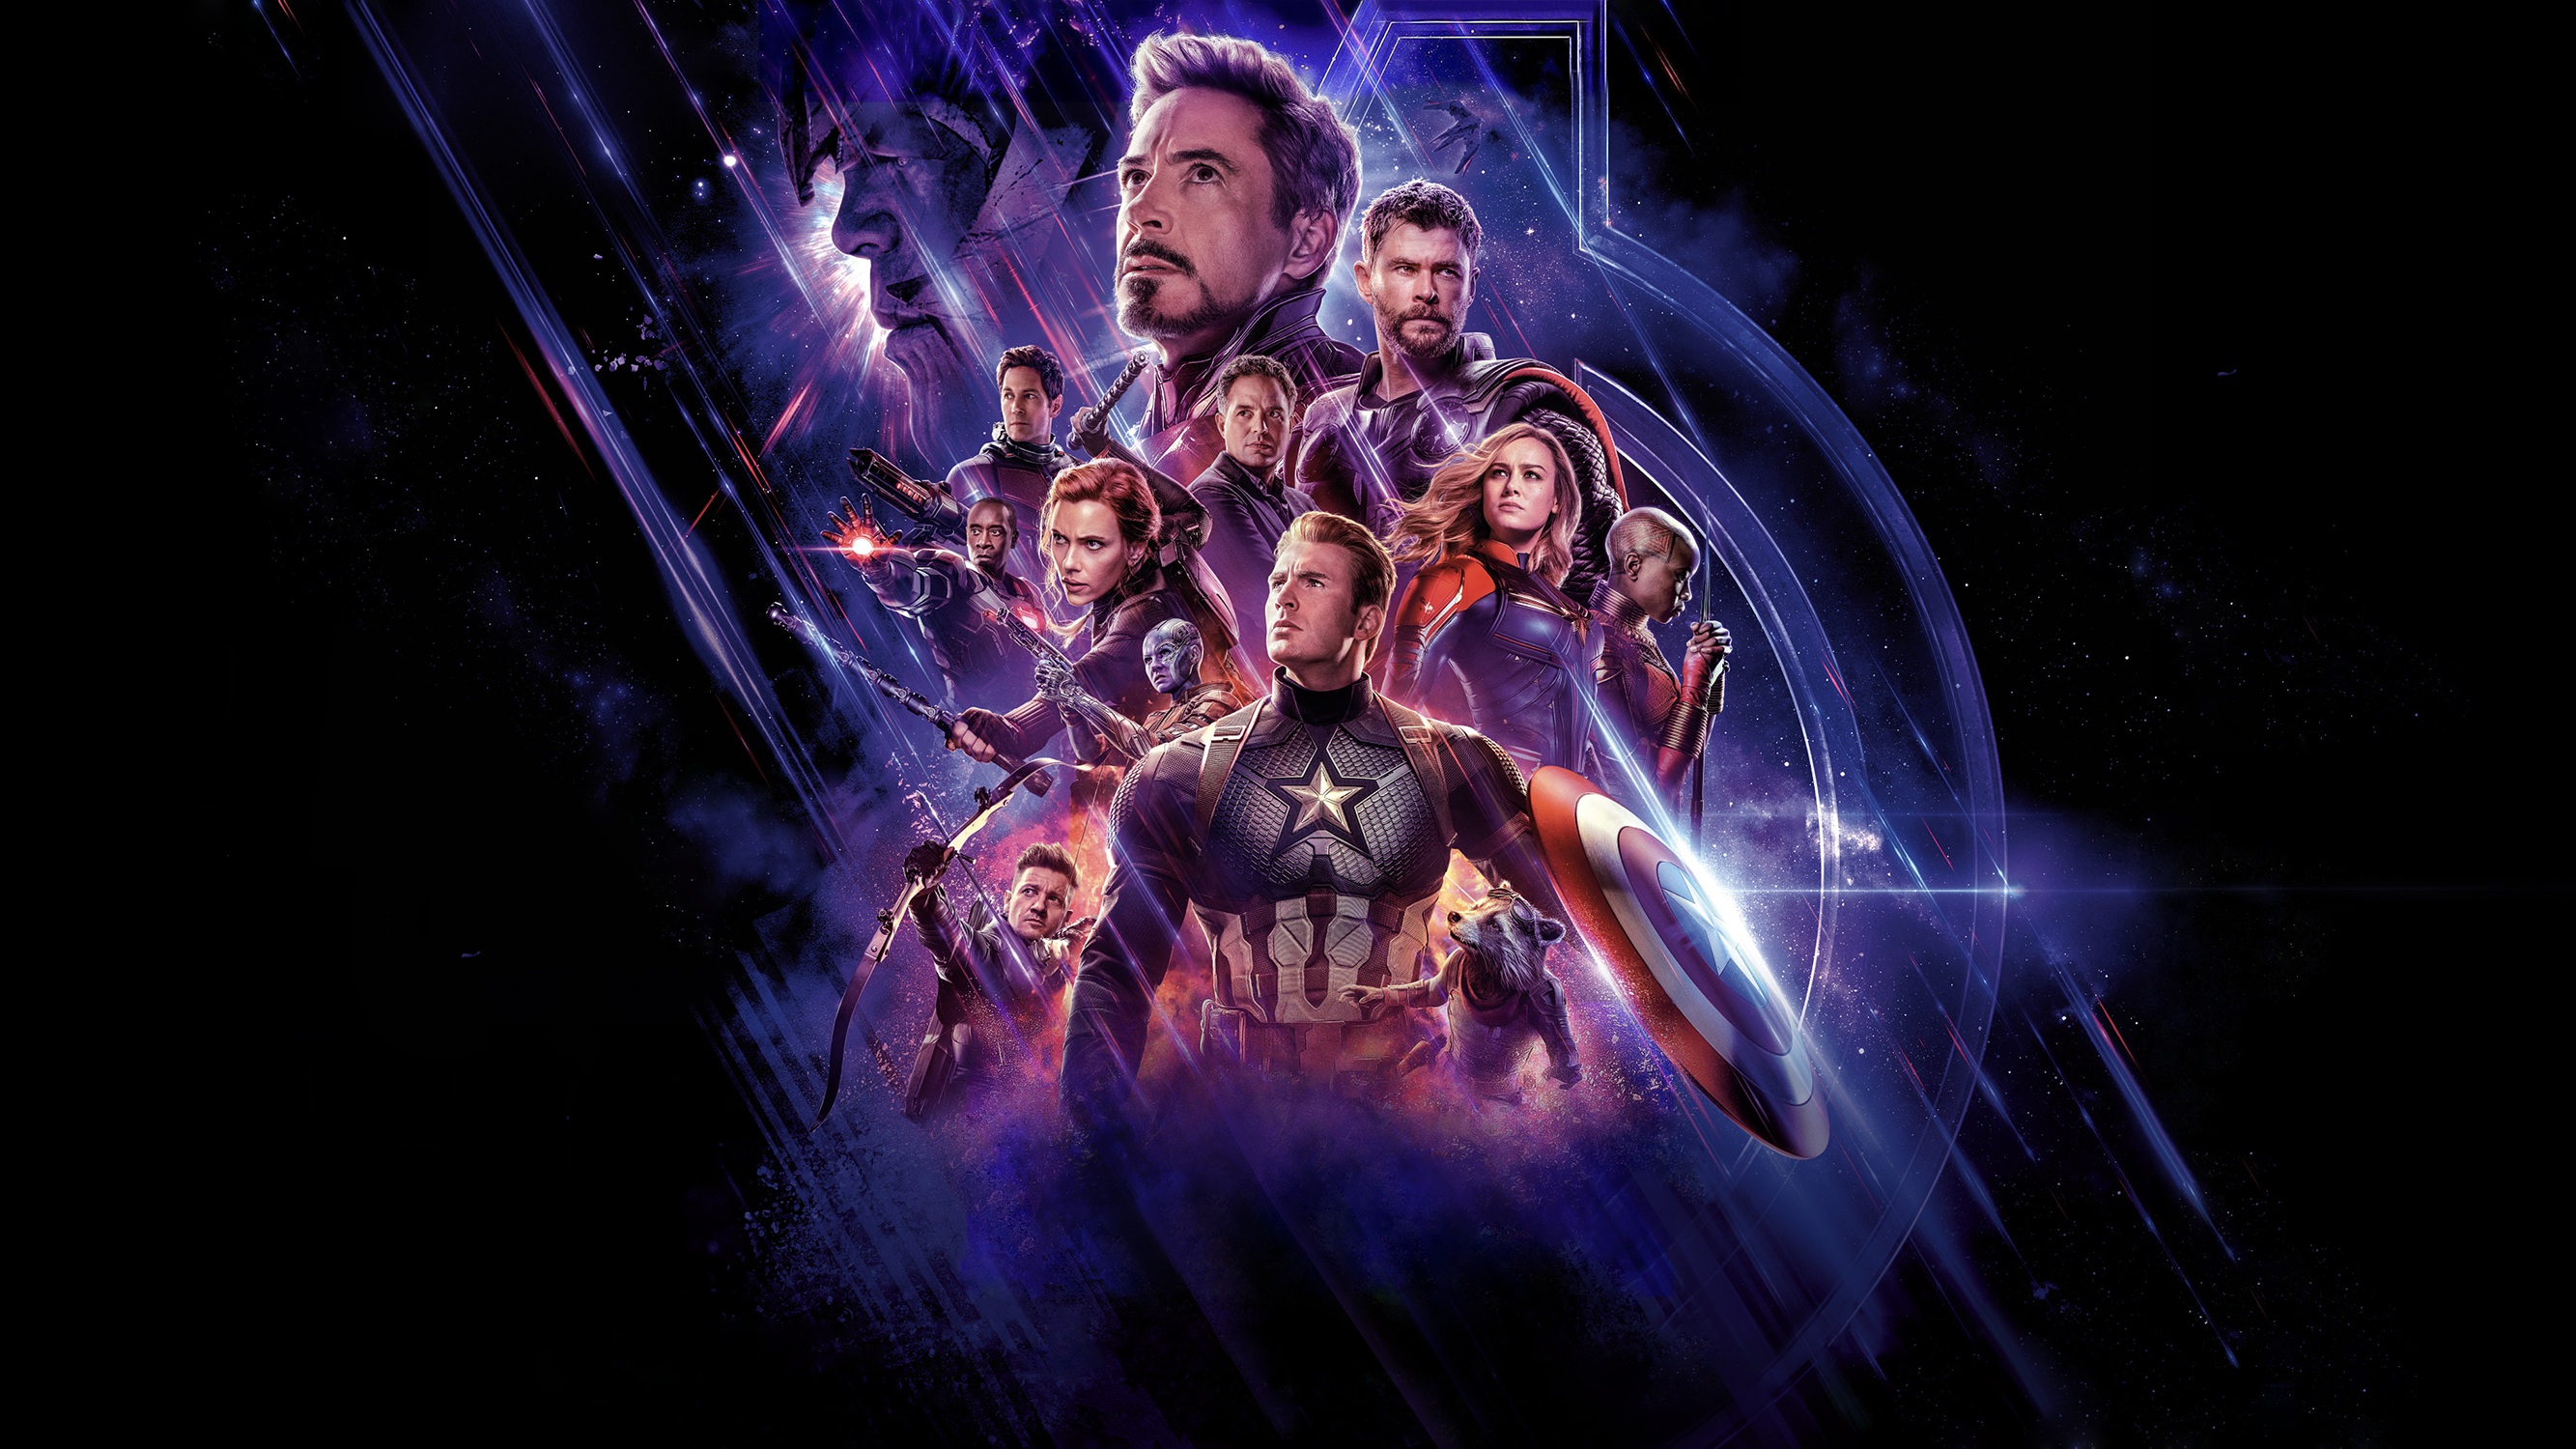 Watch Avengers: Endgame Cast Answer 50 of the Most Googled Marvel Questions, 50. Most Googled